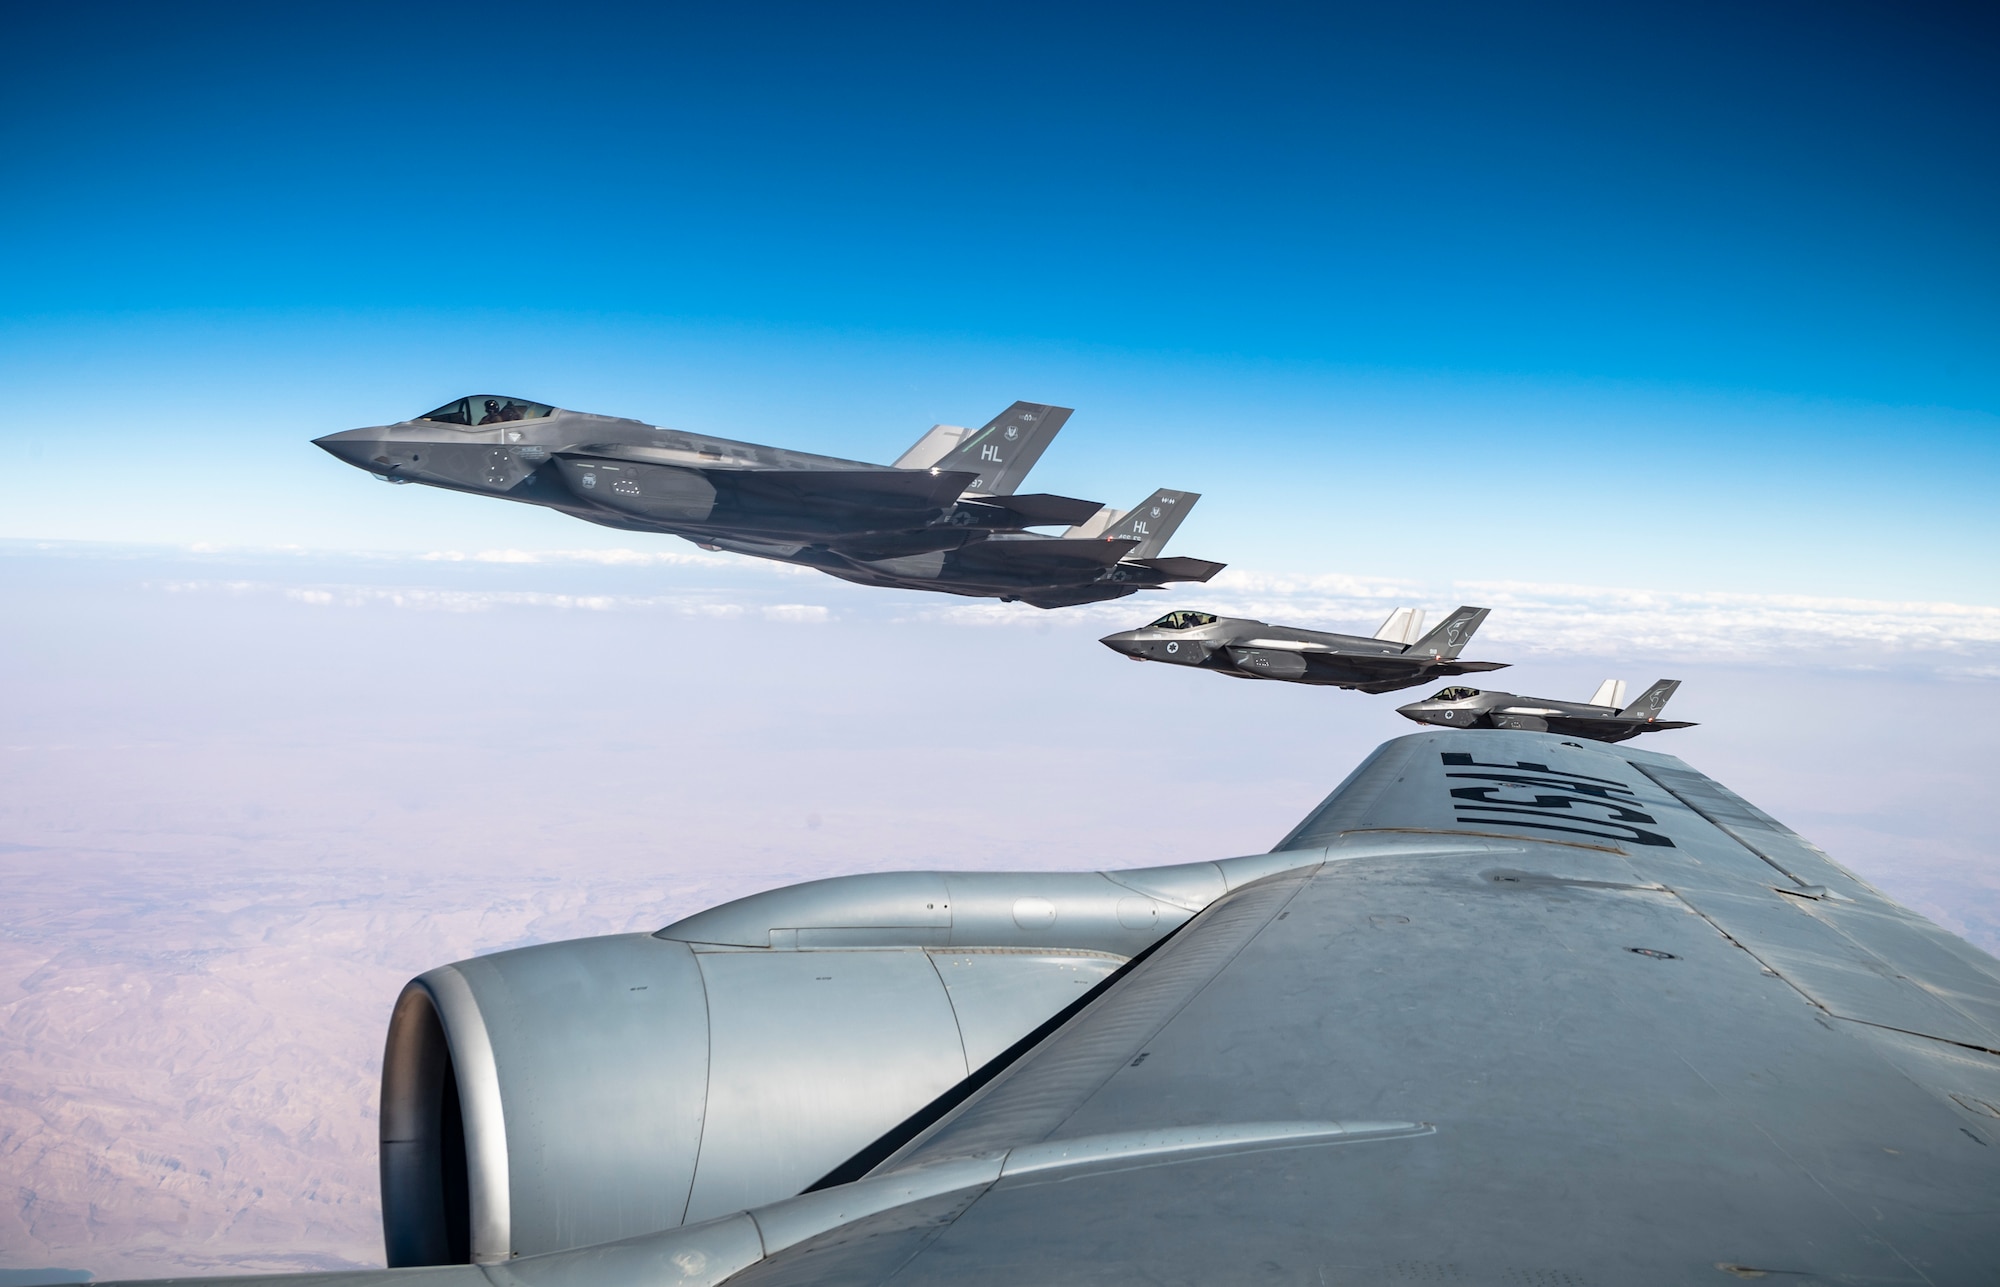 The United States and Israeli air forces train to maintain a ready posture to deter against regional aggression while forging strategic partnerships across the U.S. Central Command and U.S. European Command areas of responsibility.